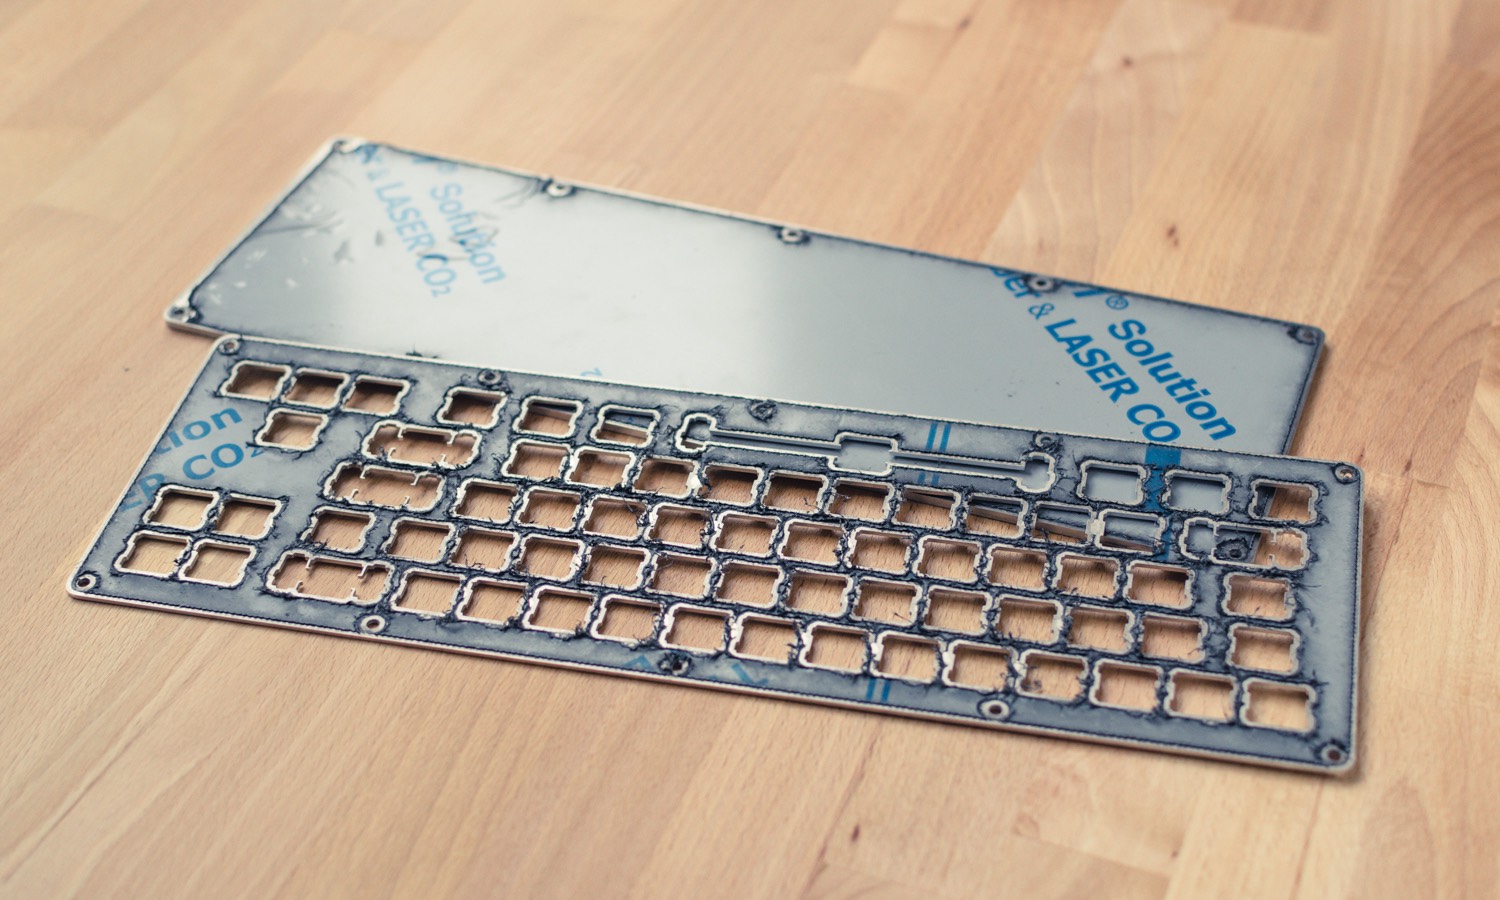 Raw Aluminium cover and bottom plate for Sandwich Case for 68Keys.io mechanical keyboard